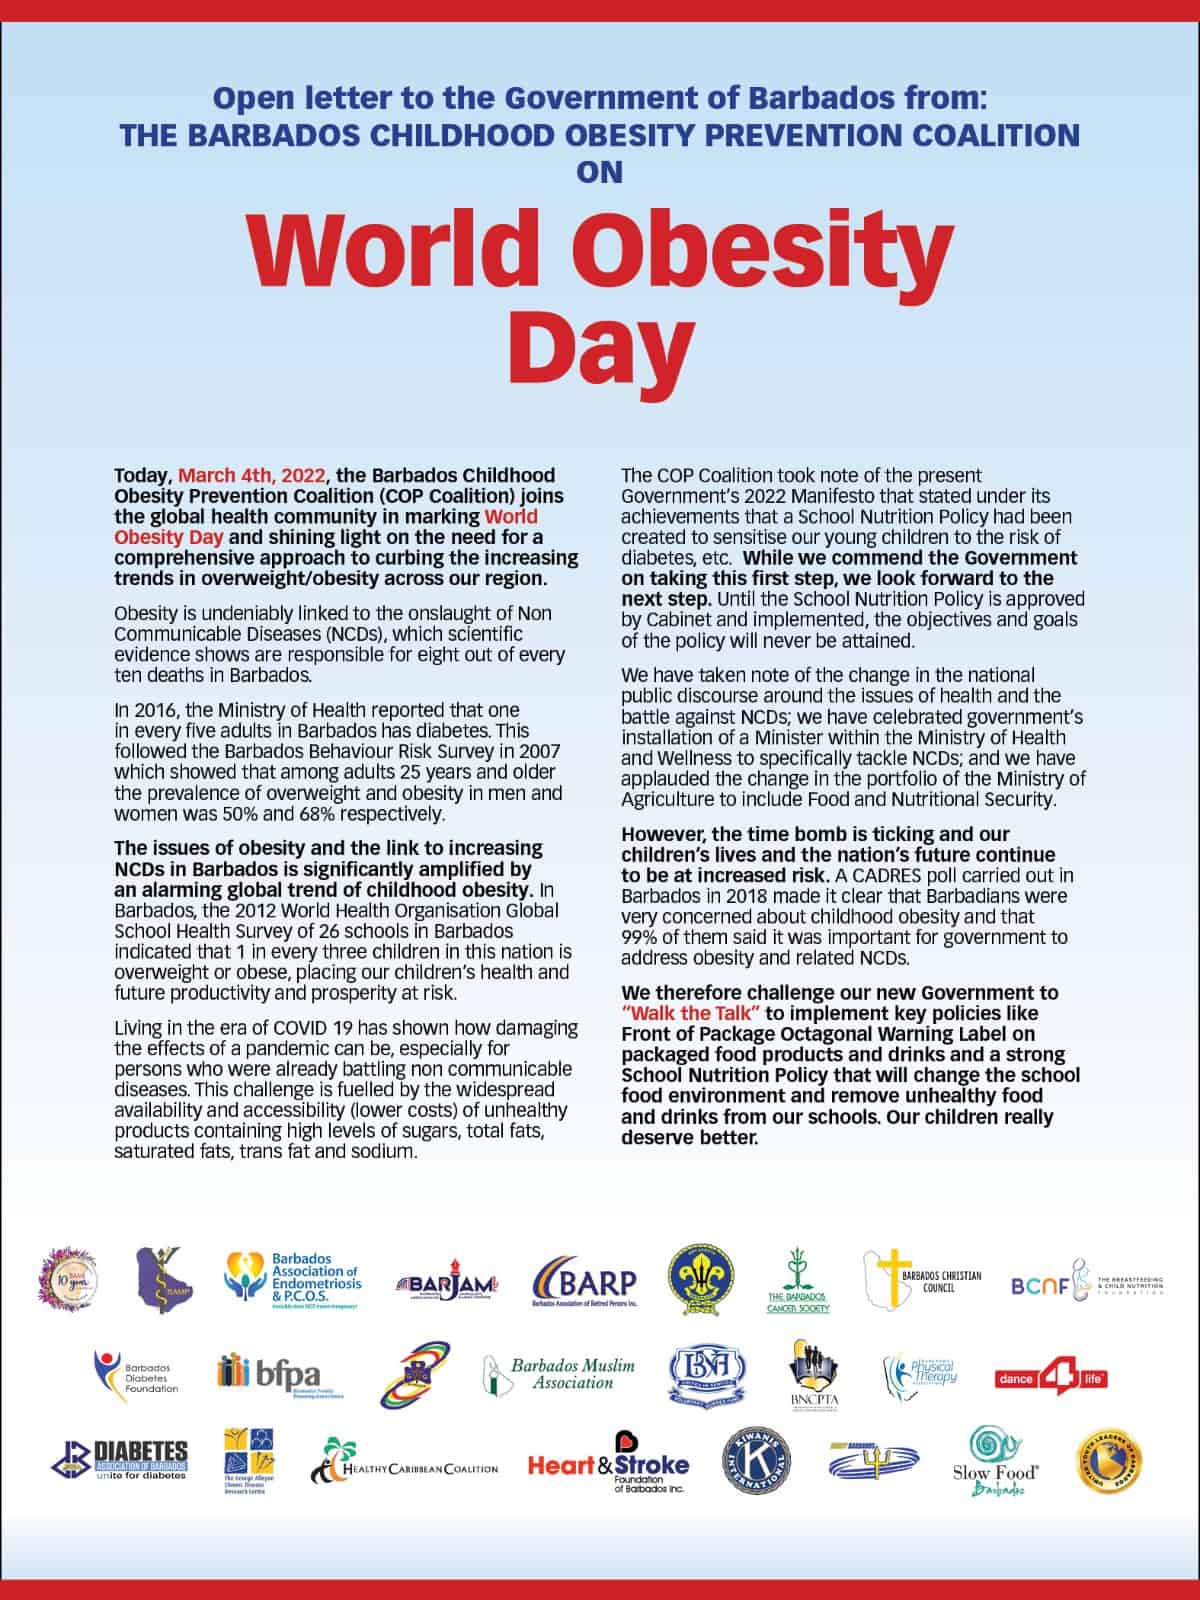 World Obesity Day - World Obesity Day Open letter to the Government of Barbados from the Childhood Obesity Prevention Coalition